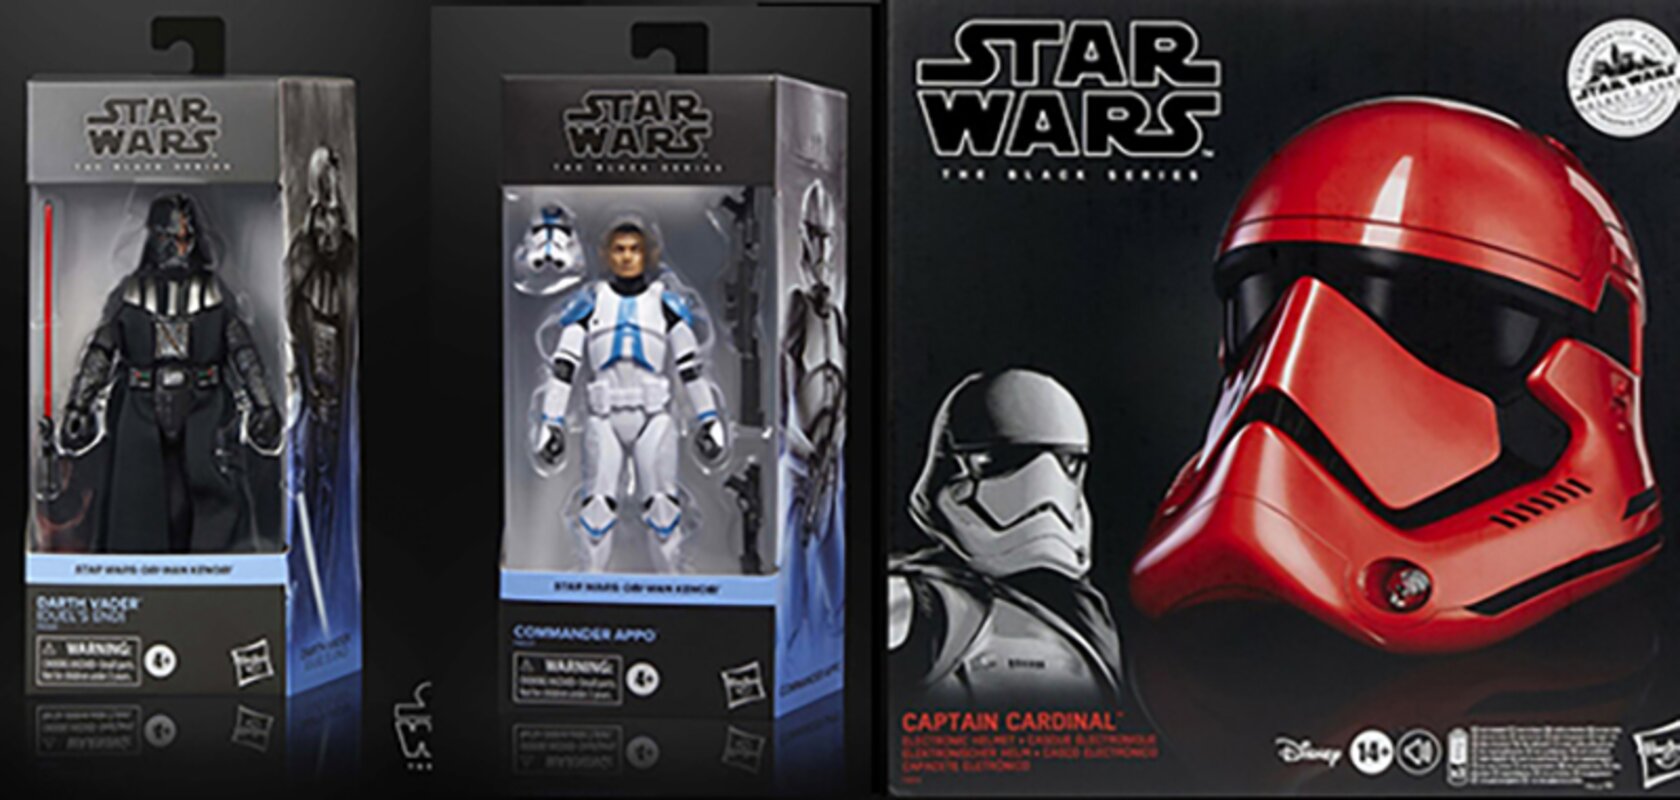 Star Wars Target Exclusive (Duels End) Darth Vader and Commader Appo Black  Series Figures from Hasbro